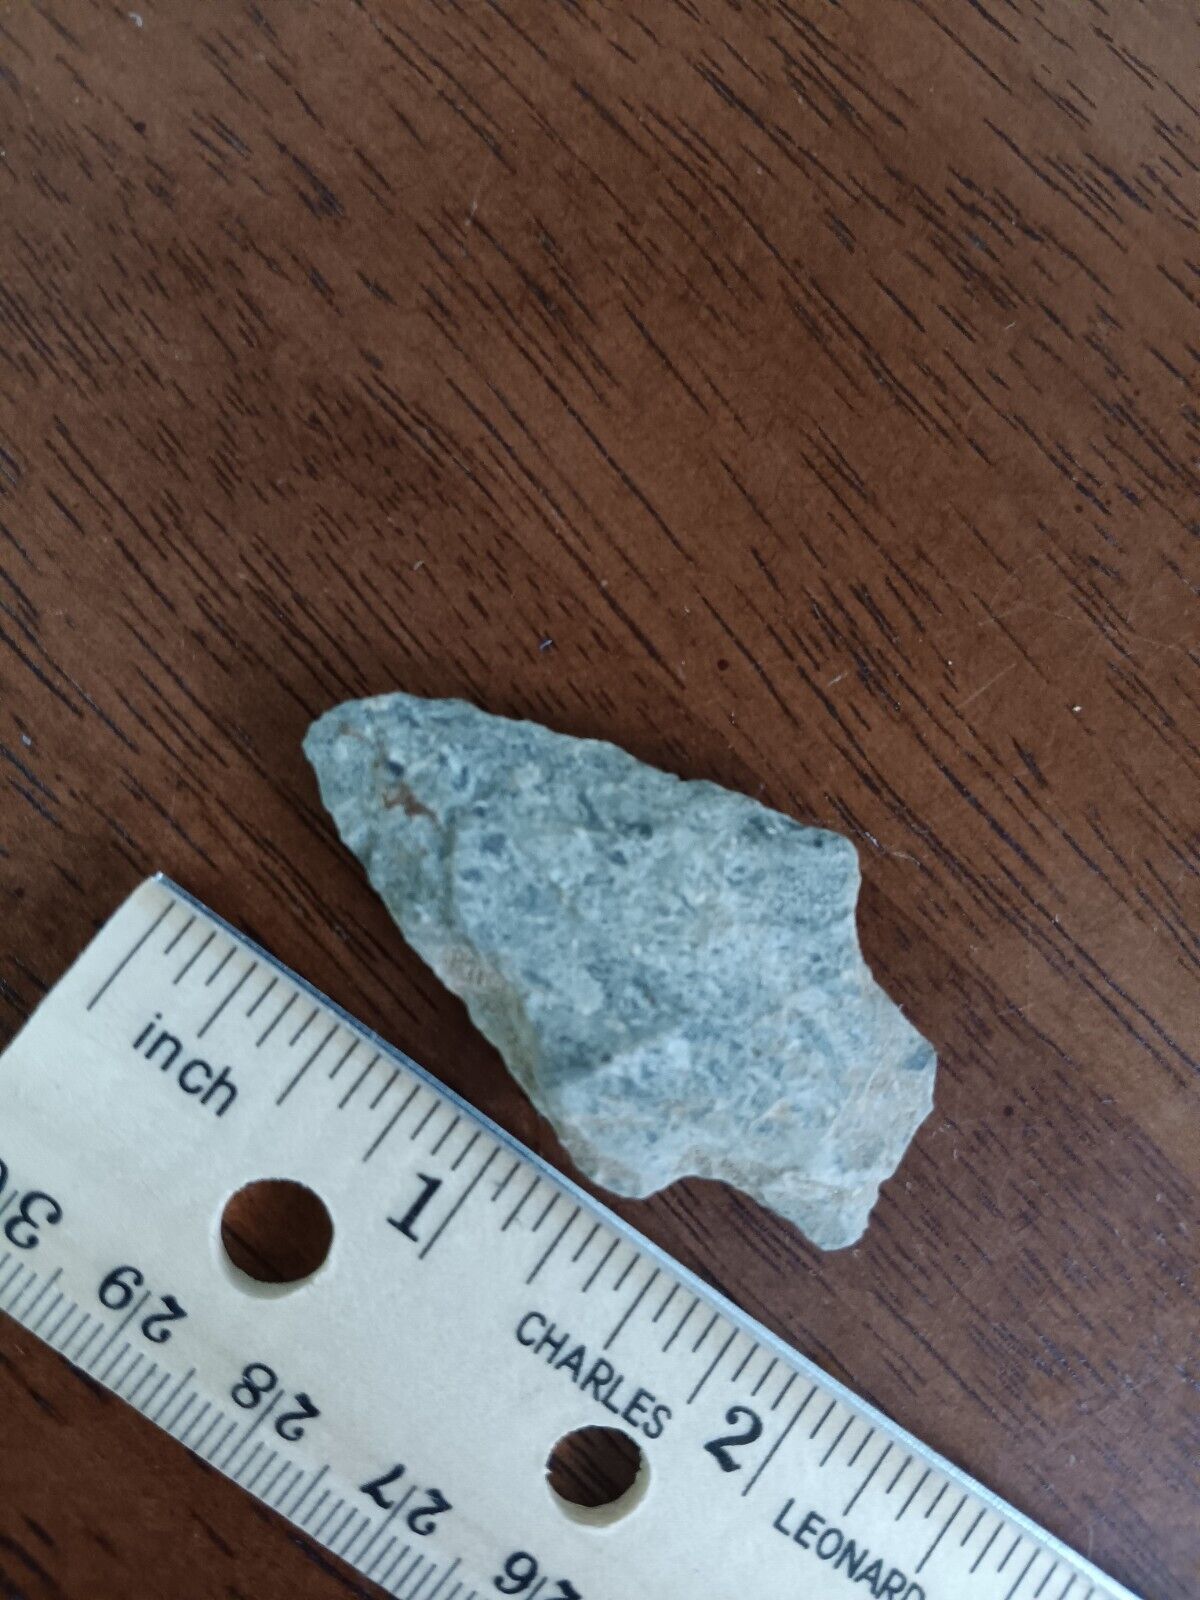 AUTHENTIC NATIVE AMERICAN INDIAN ARTIFACT FOUND, EASTERN N.C.--- ZZZ/72